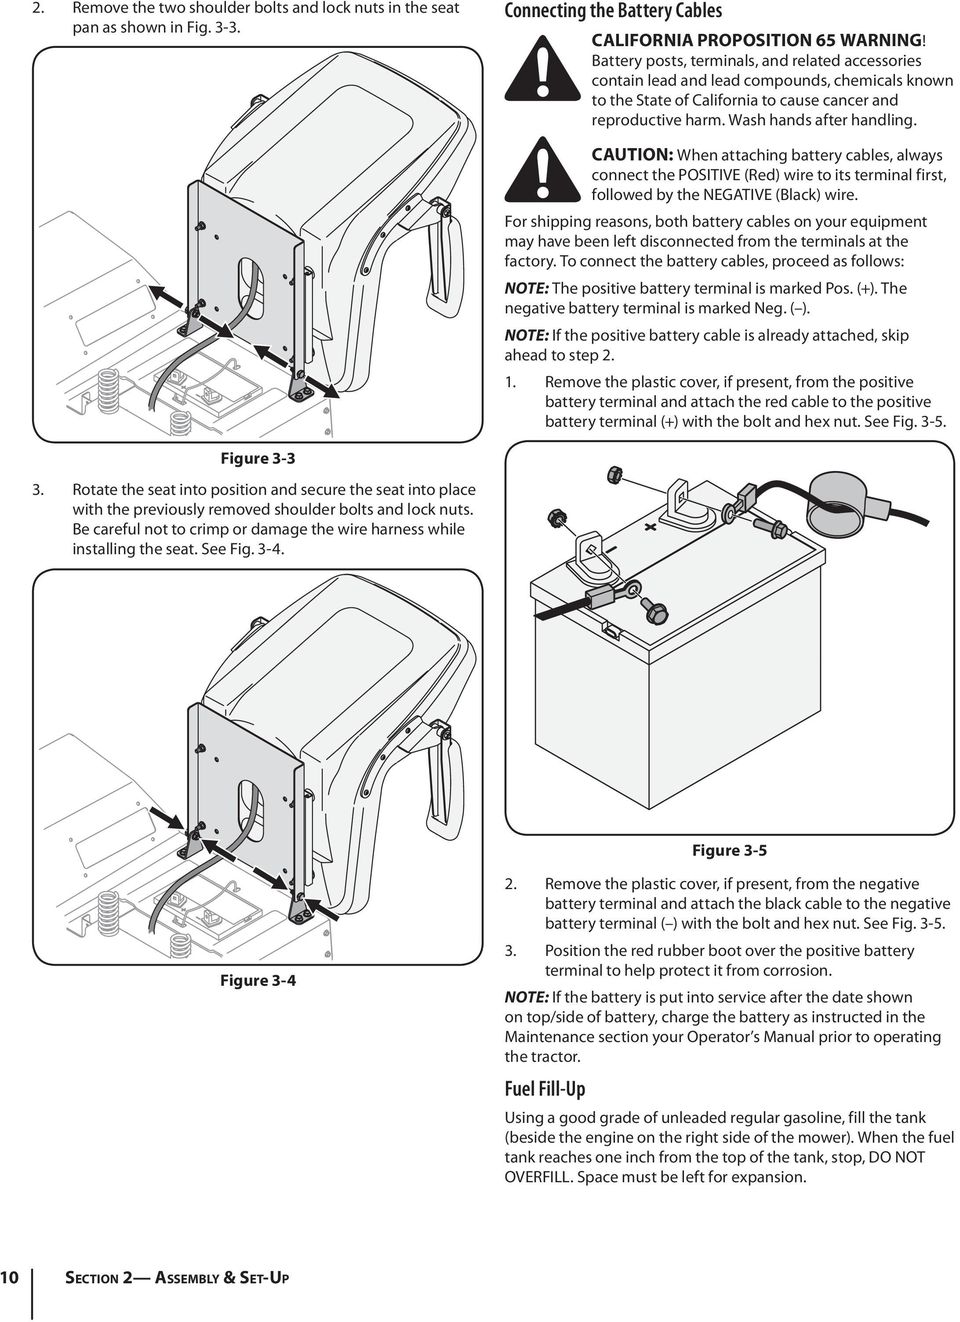 Be careful not to crimp or damage the wire harness while installing the seat. See Fig. 3- Connecting the Battery Cables California Proposition 65 Warning!